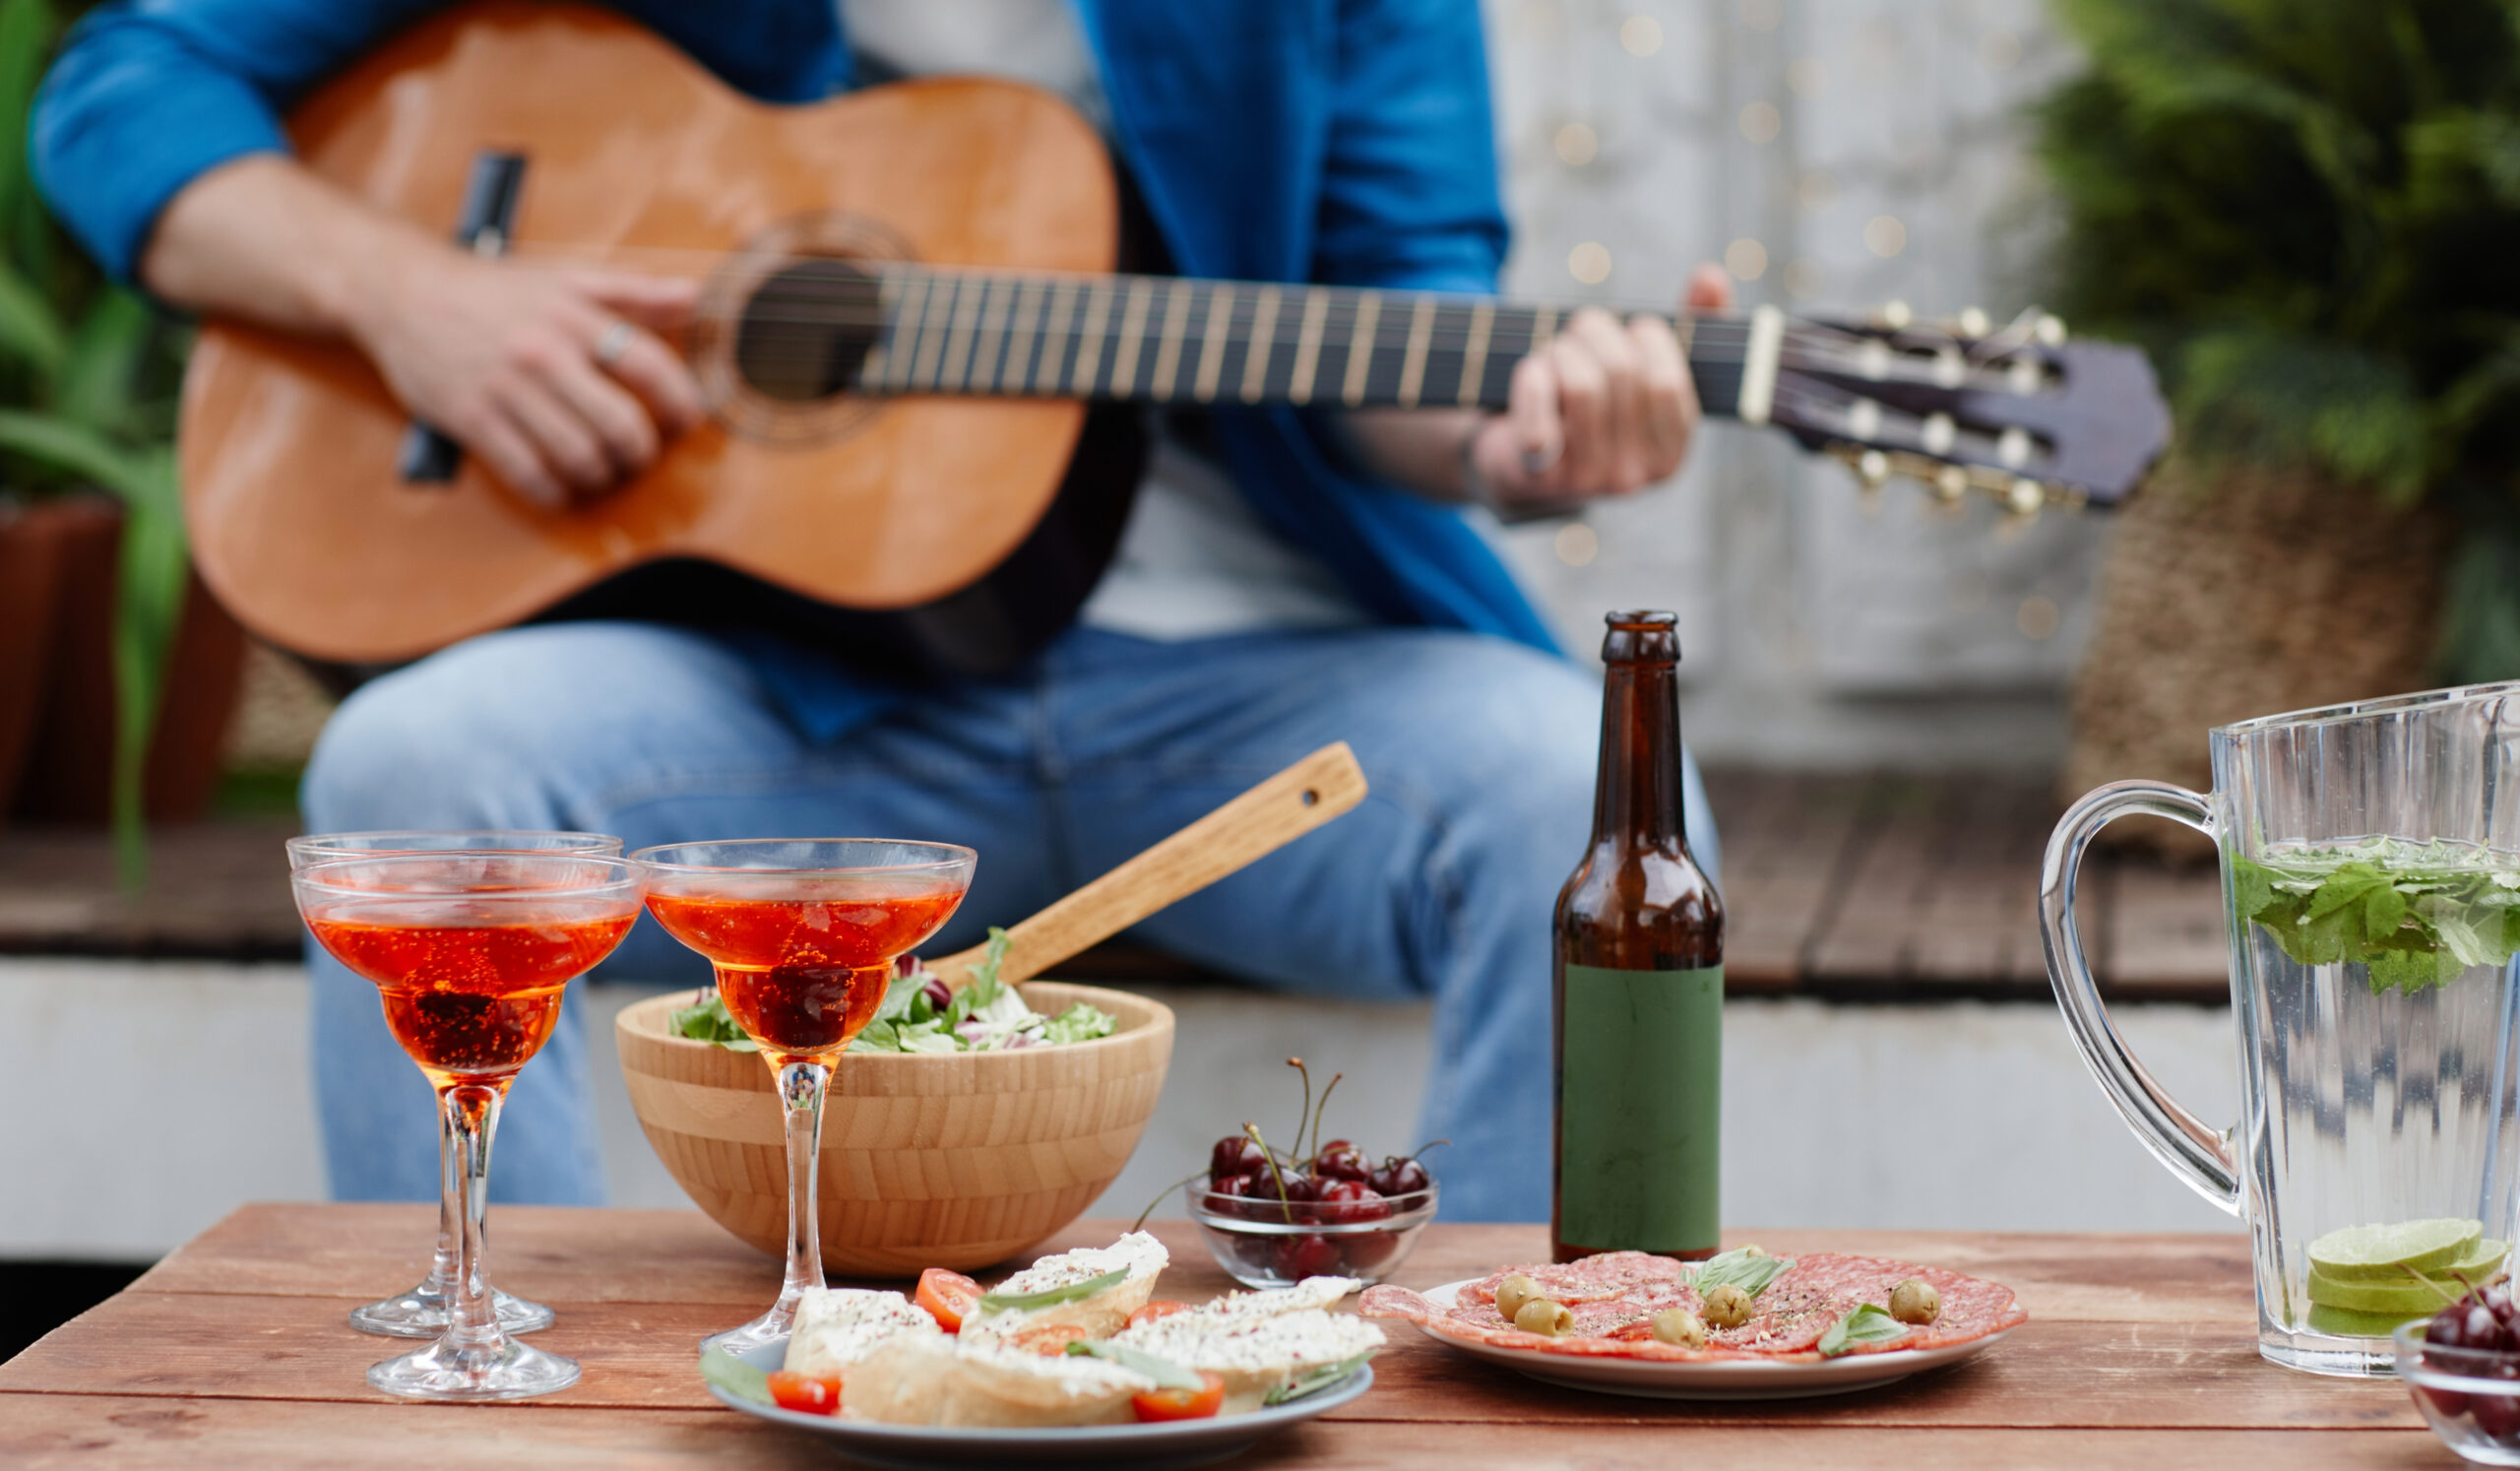 Musician playing guitar with food